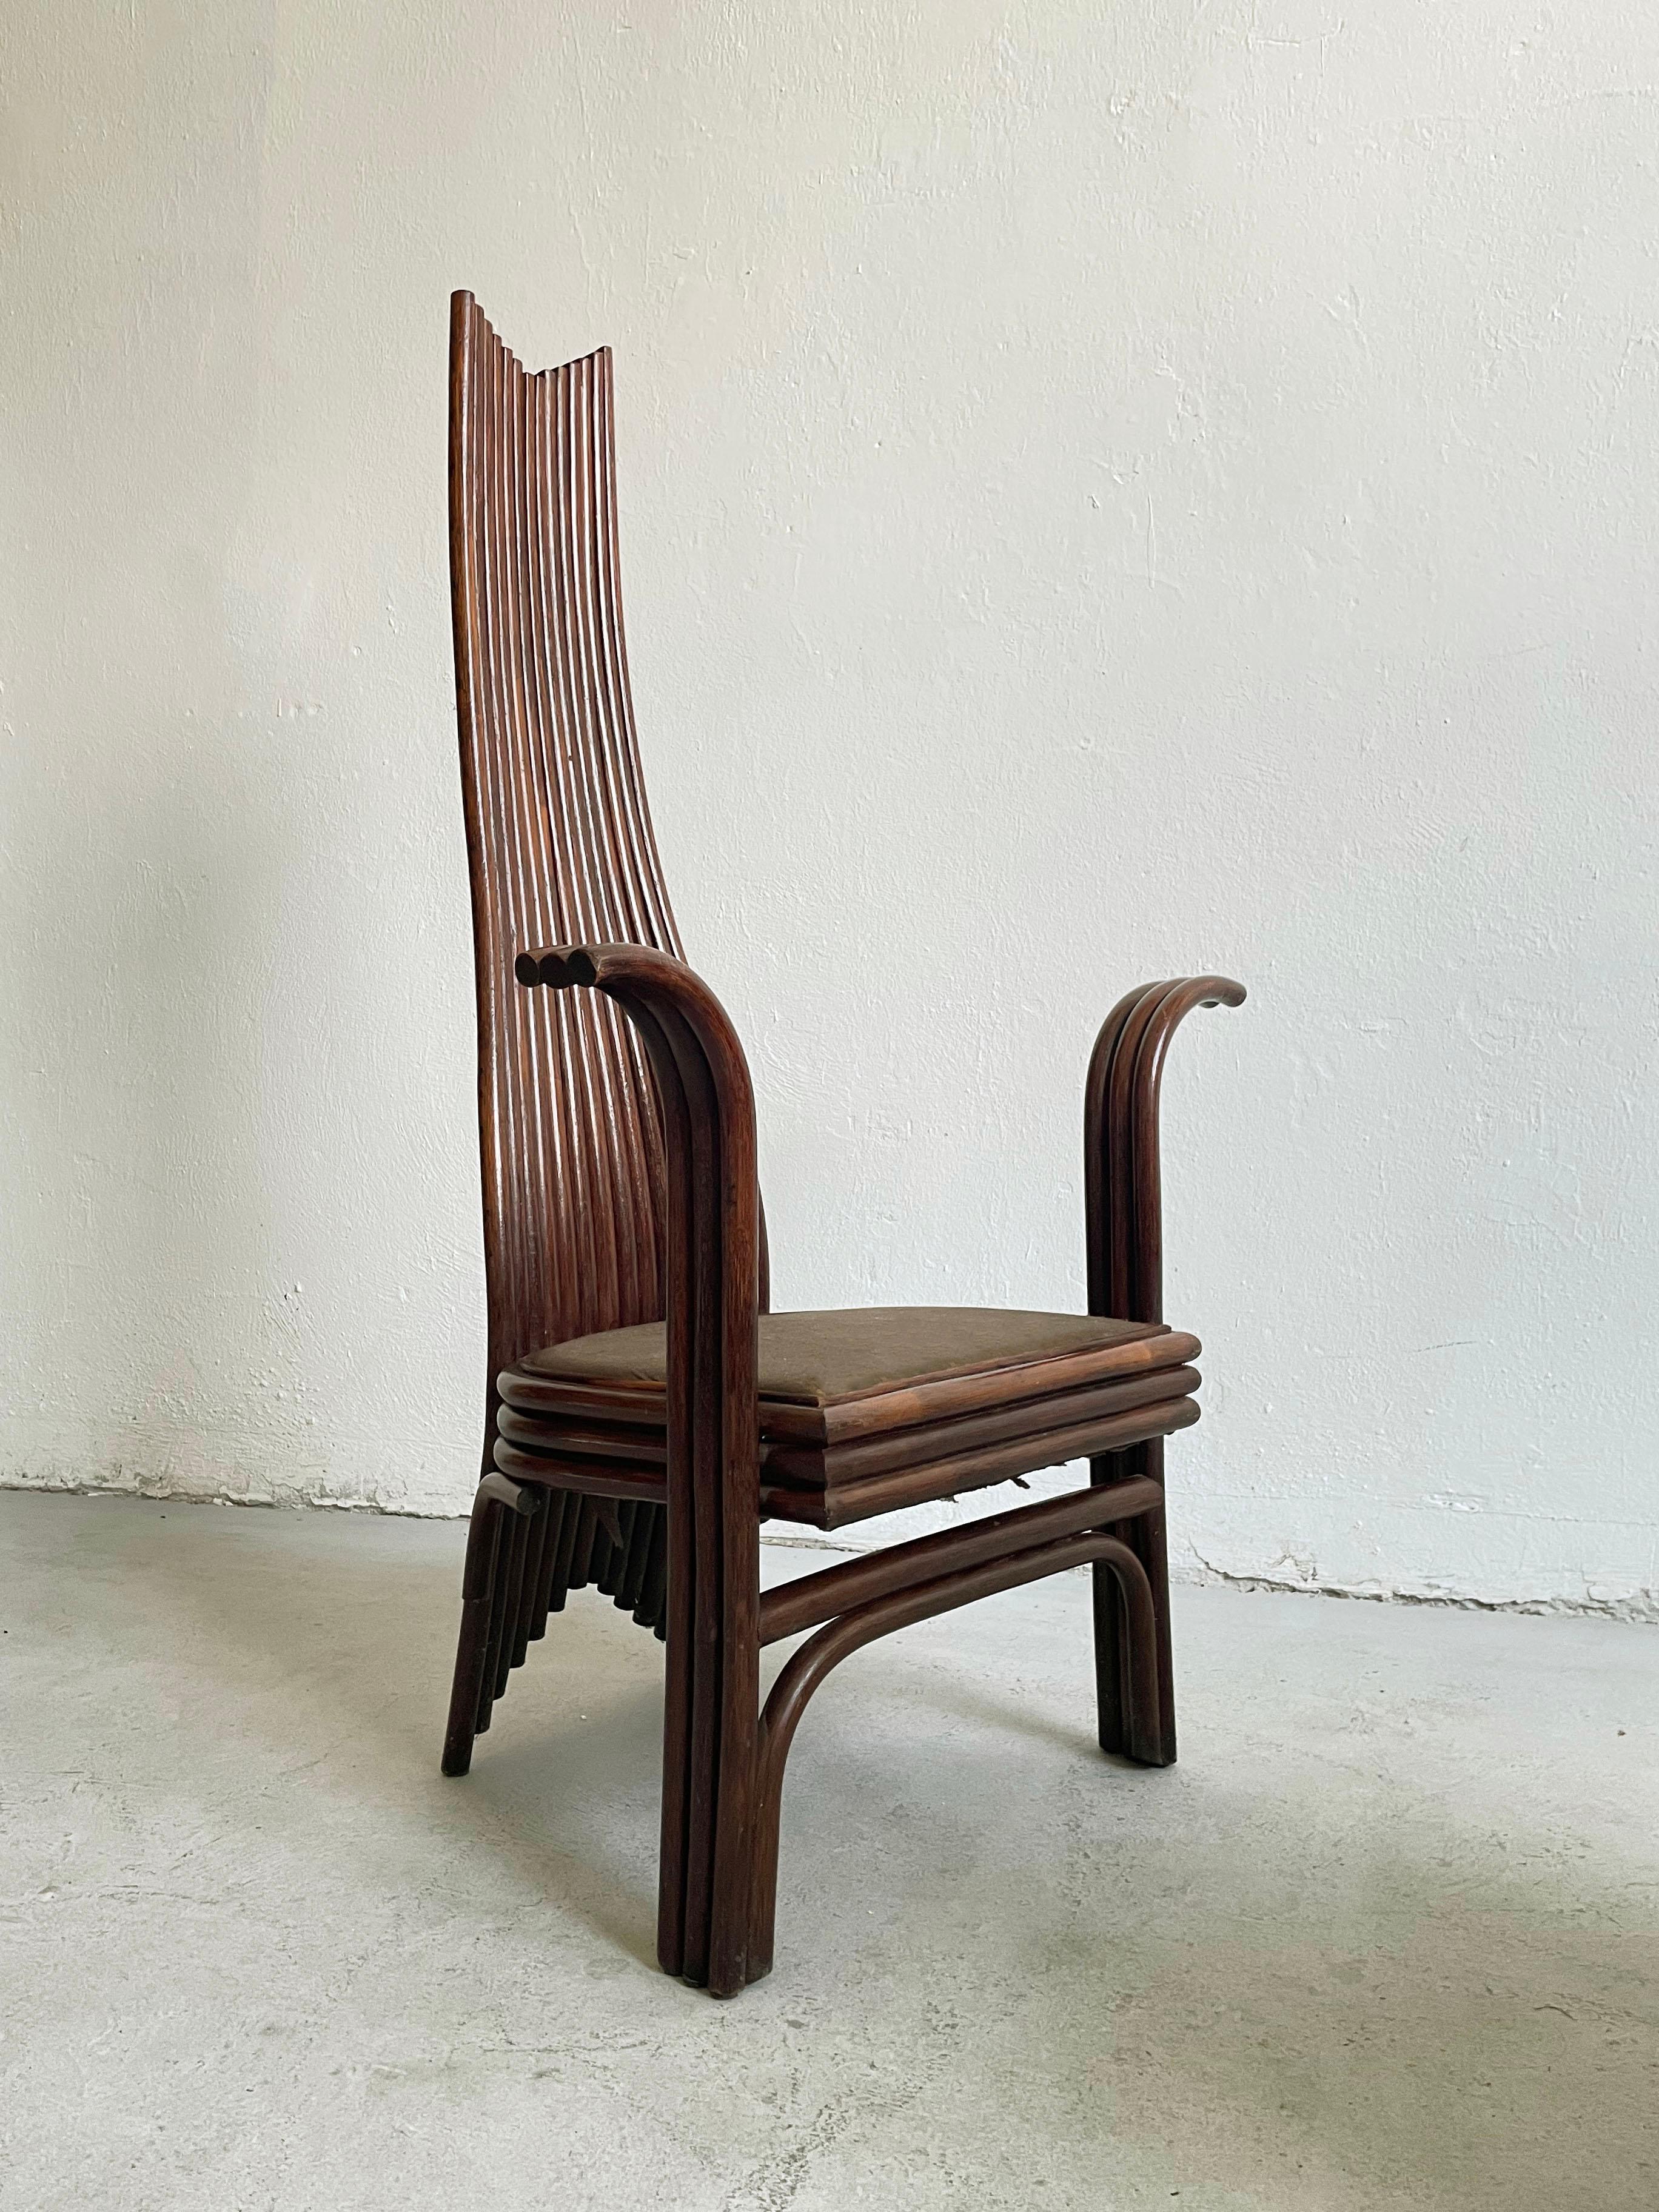 Set of two extravagant dining chairs designed and produced by Mcguire in the USA in the 1980s. 

This design is often attributed to Danny Ho Fong. 

The chairs are constructed of dark brown stained bamboo, and have a very high curved back and